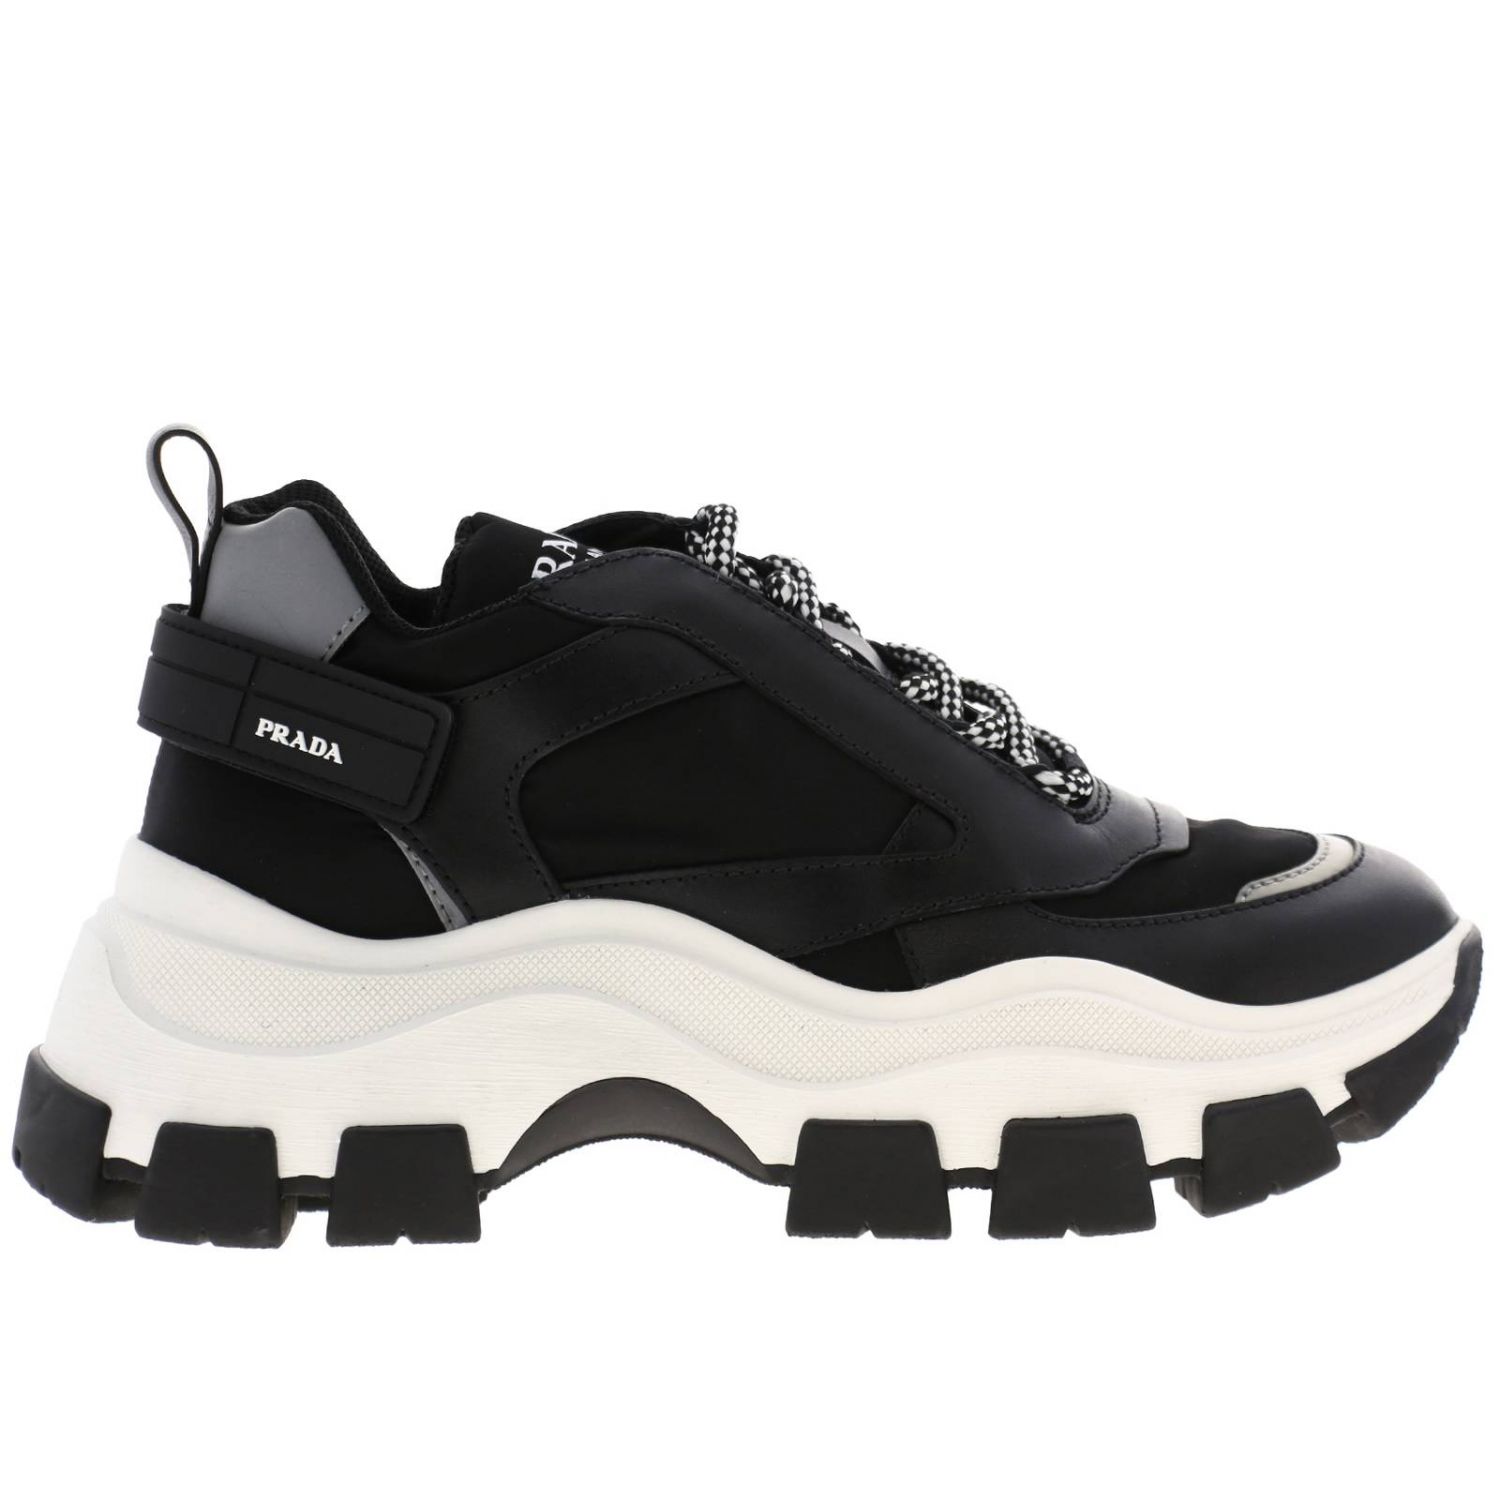 PRADA: Pegasus lace-up sneakers in leather and nylon with logo ...